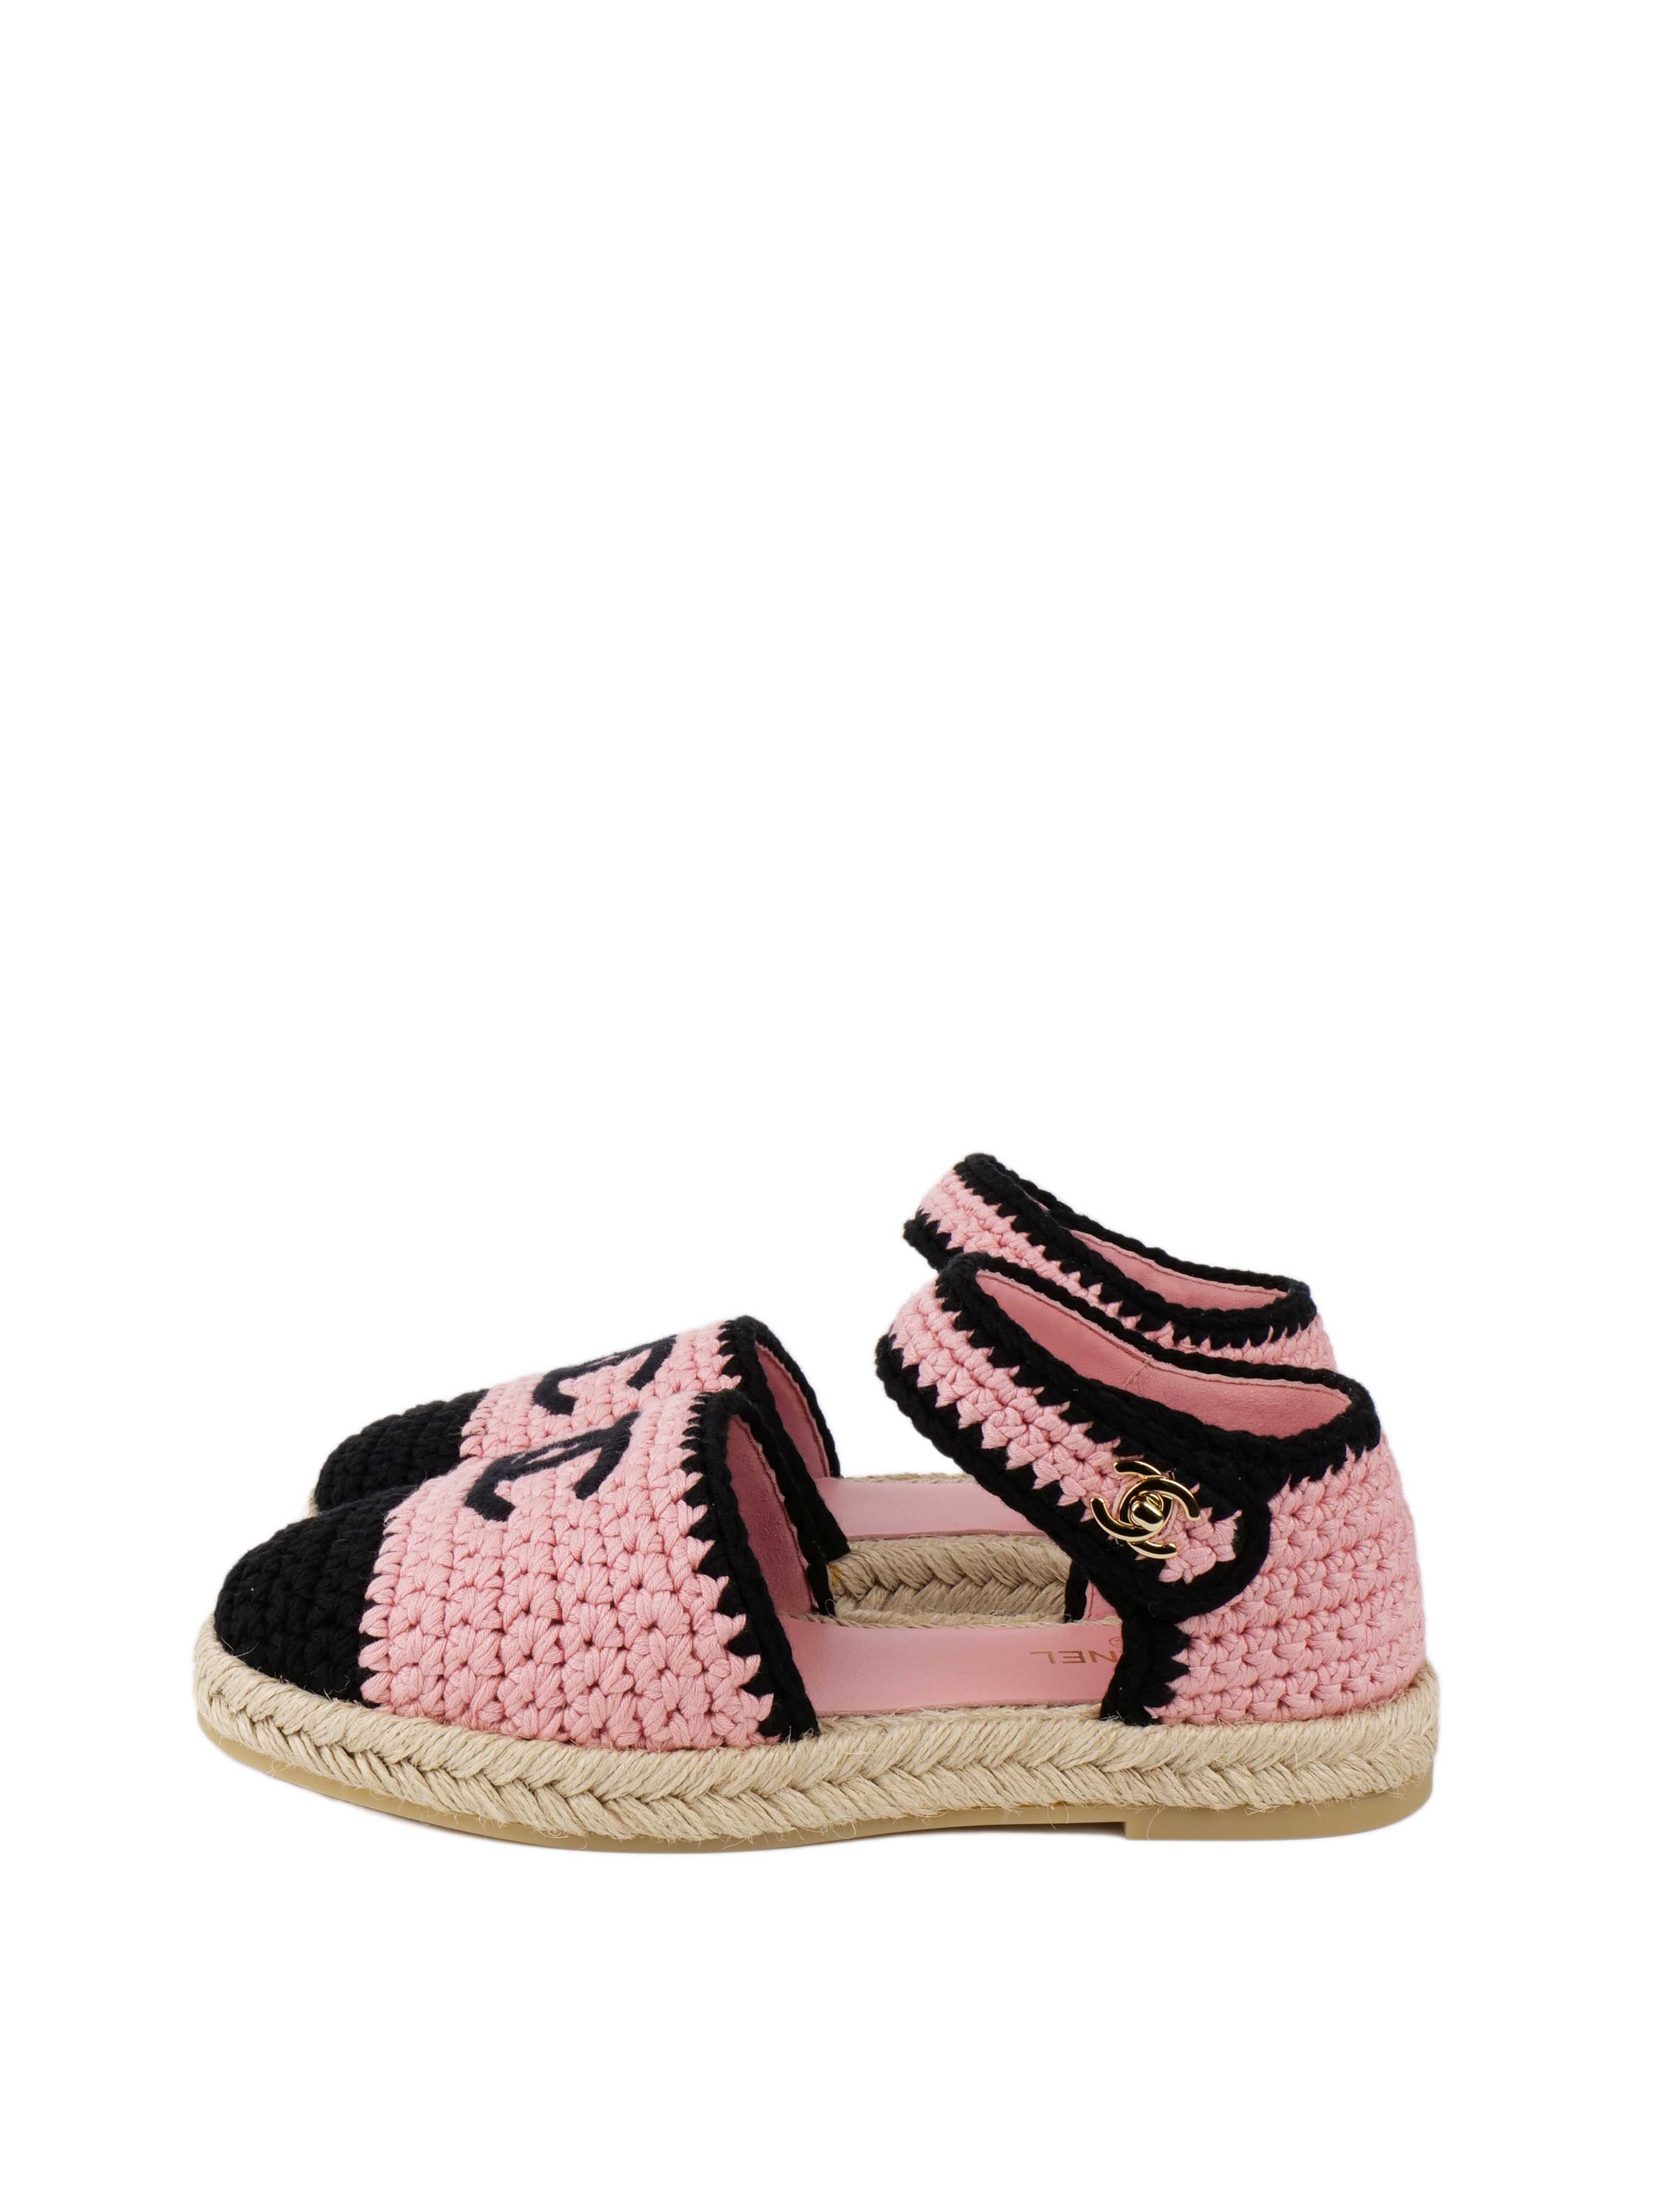 Chanel Pink Woven Espadrilles Size 38.